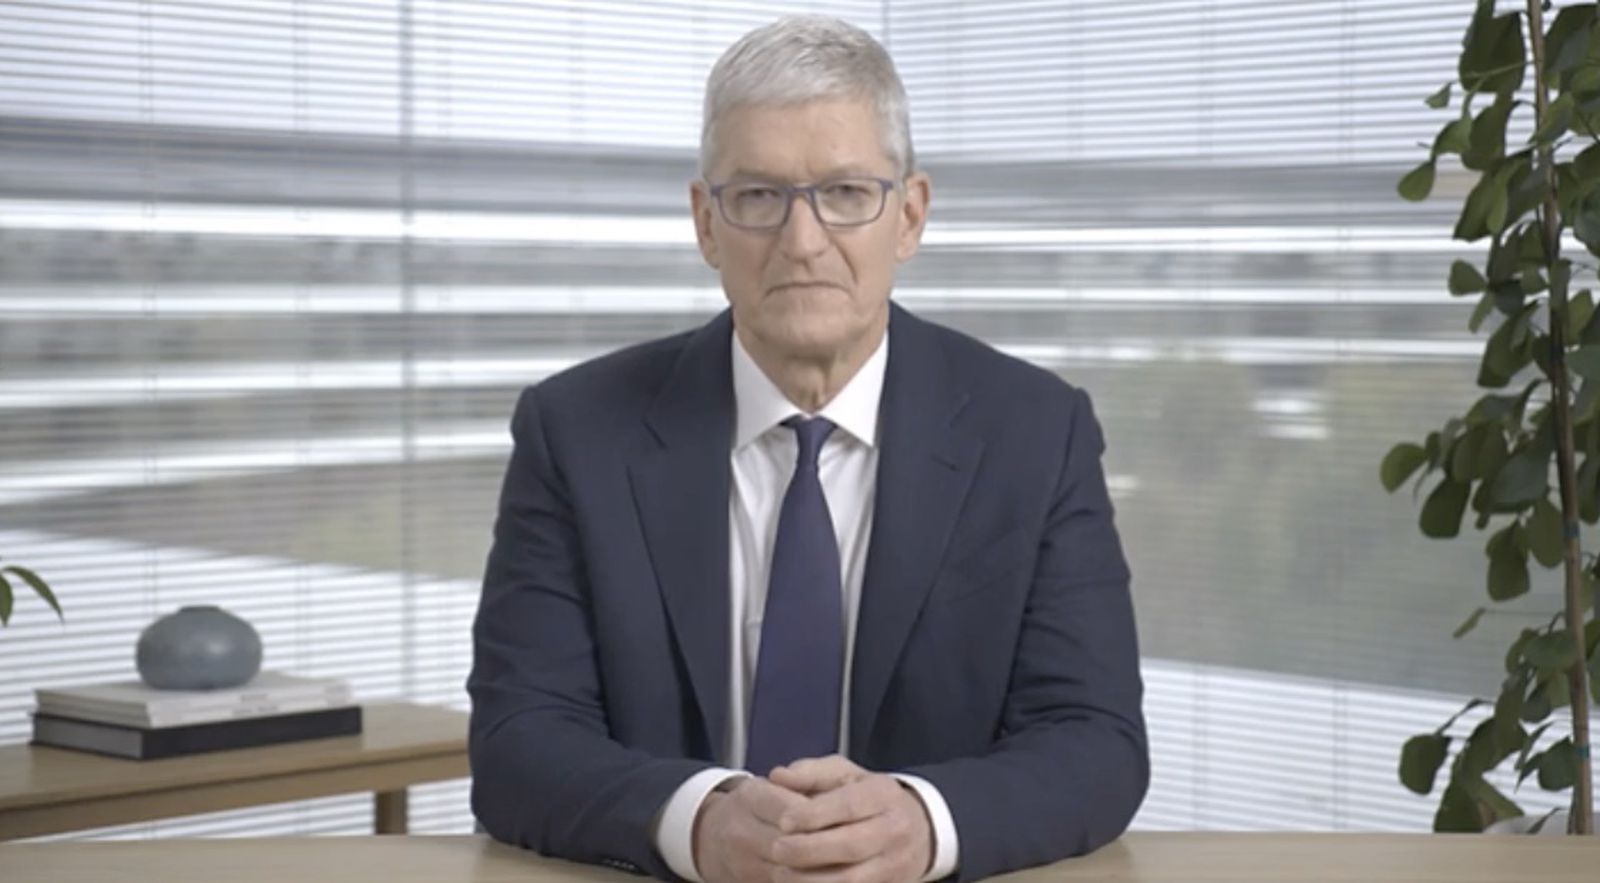 Tim Cook is required to attend the 7-hour testimony in the Apple vs.  Epic Games